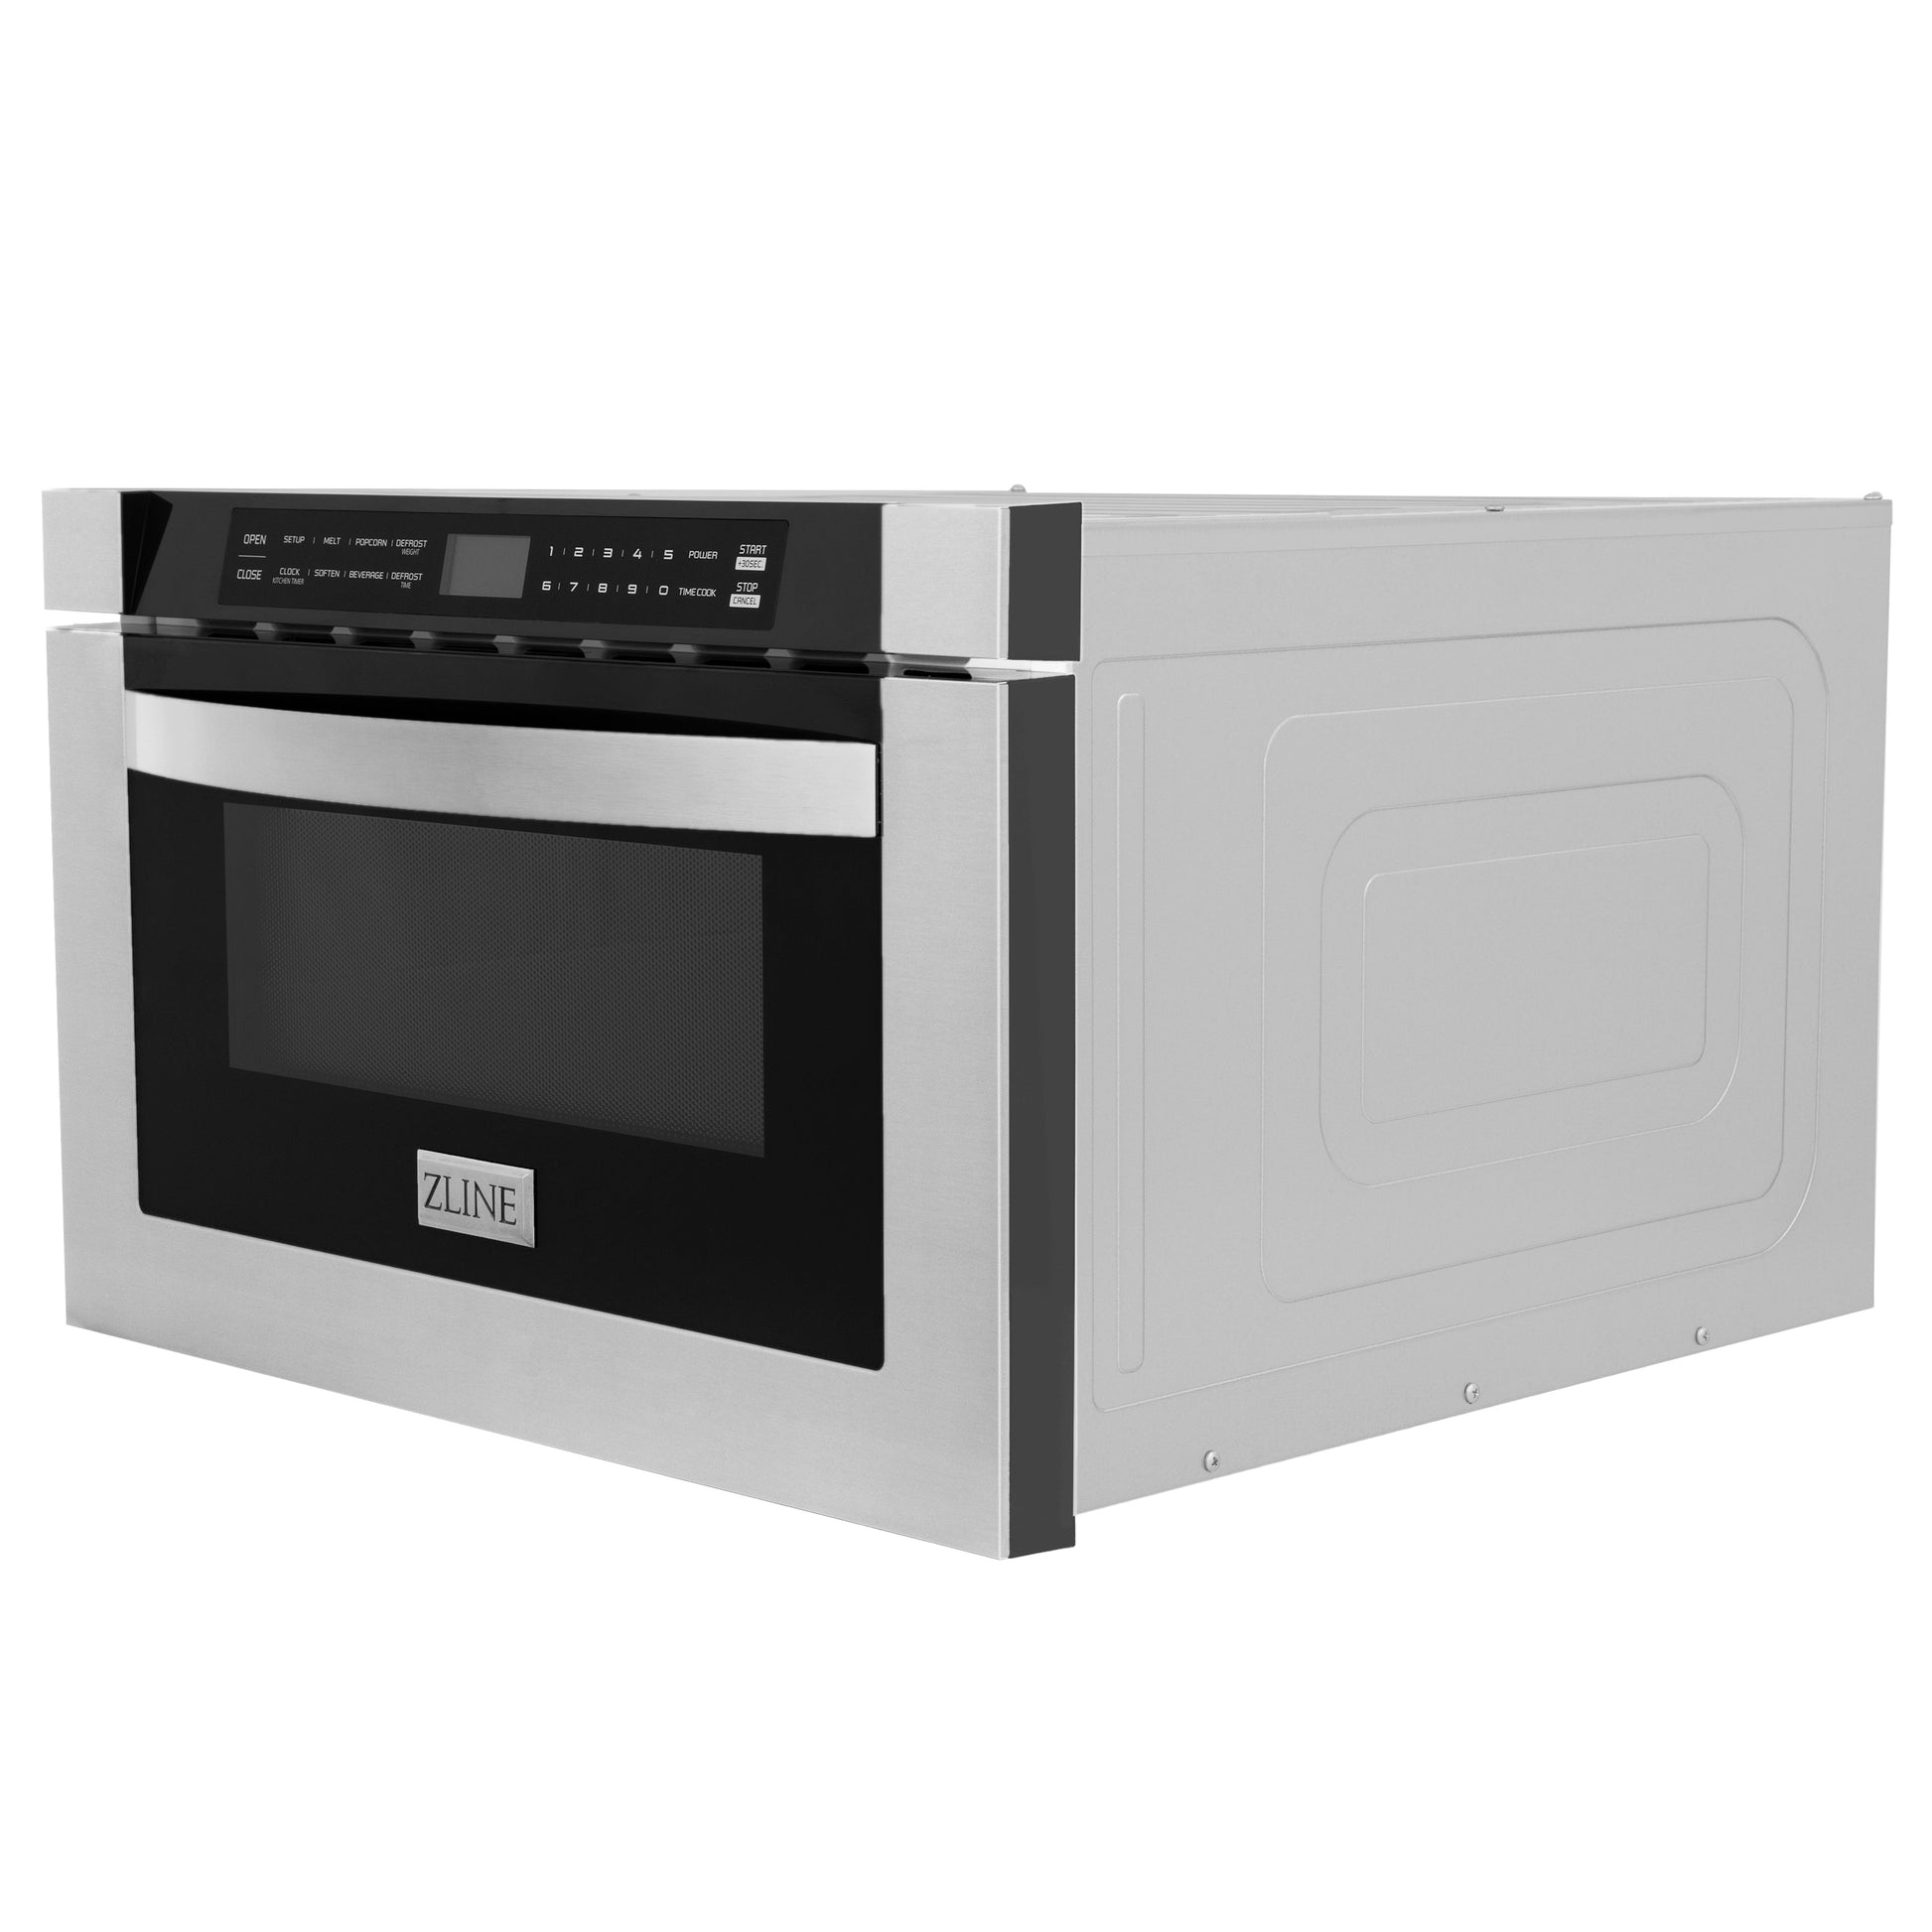 ZLINE 4-Appliance 30" Kitchen Package with Stainless Steel Dual Fuel Range, Range Hood, Microwave Drawer, and Classic Dishwasher